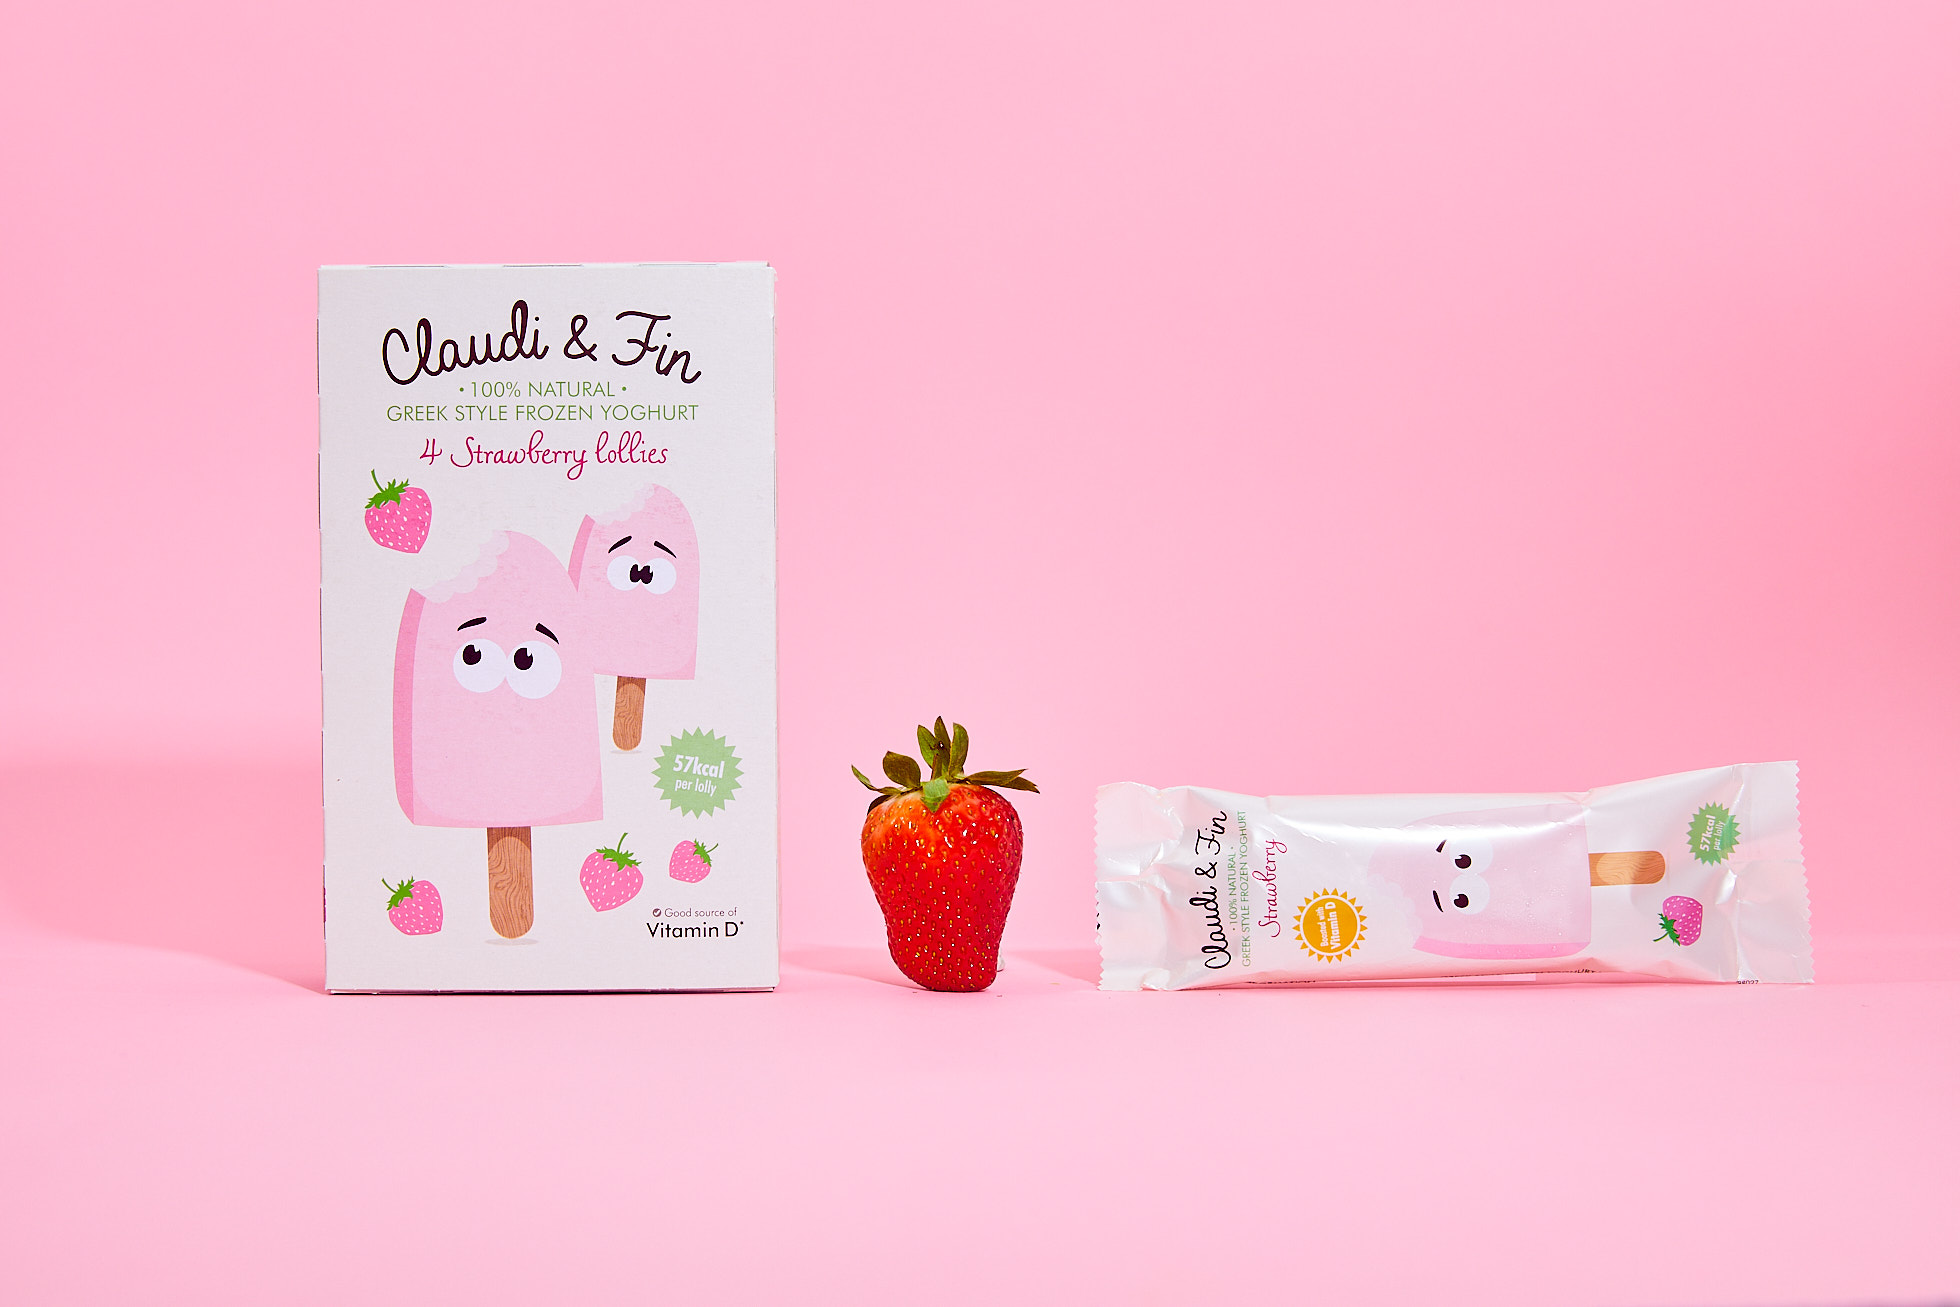 Box of Claudi and Fin ice lollies with a lolly and strawberry against a pink background